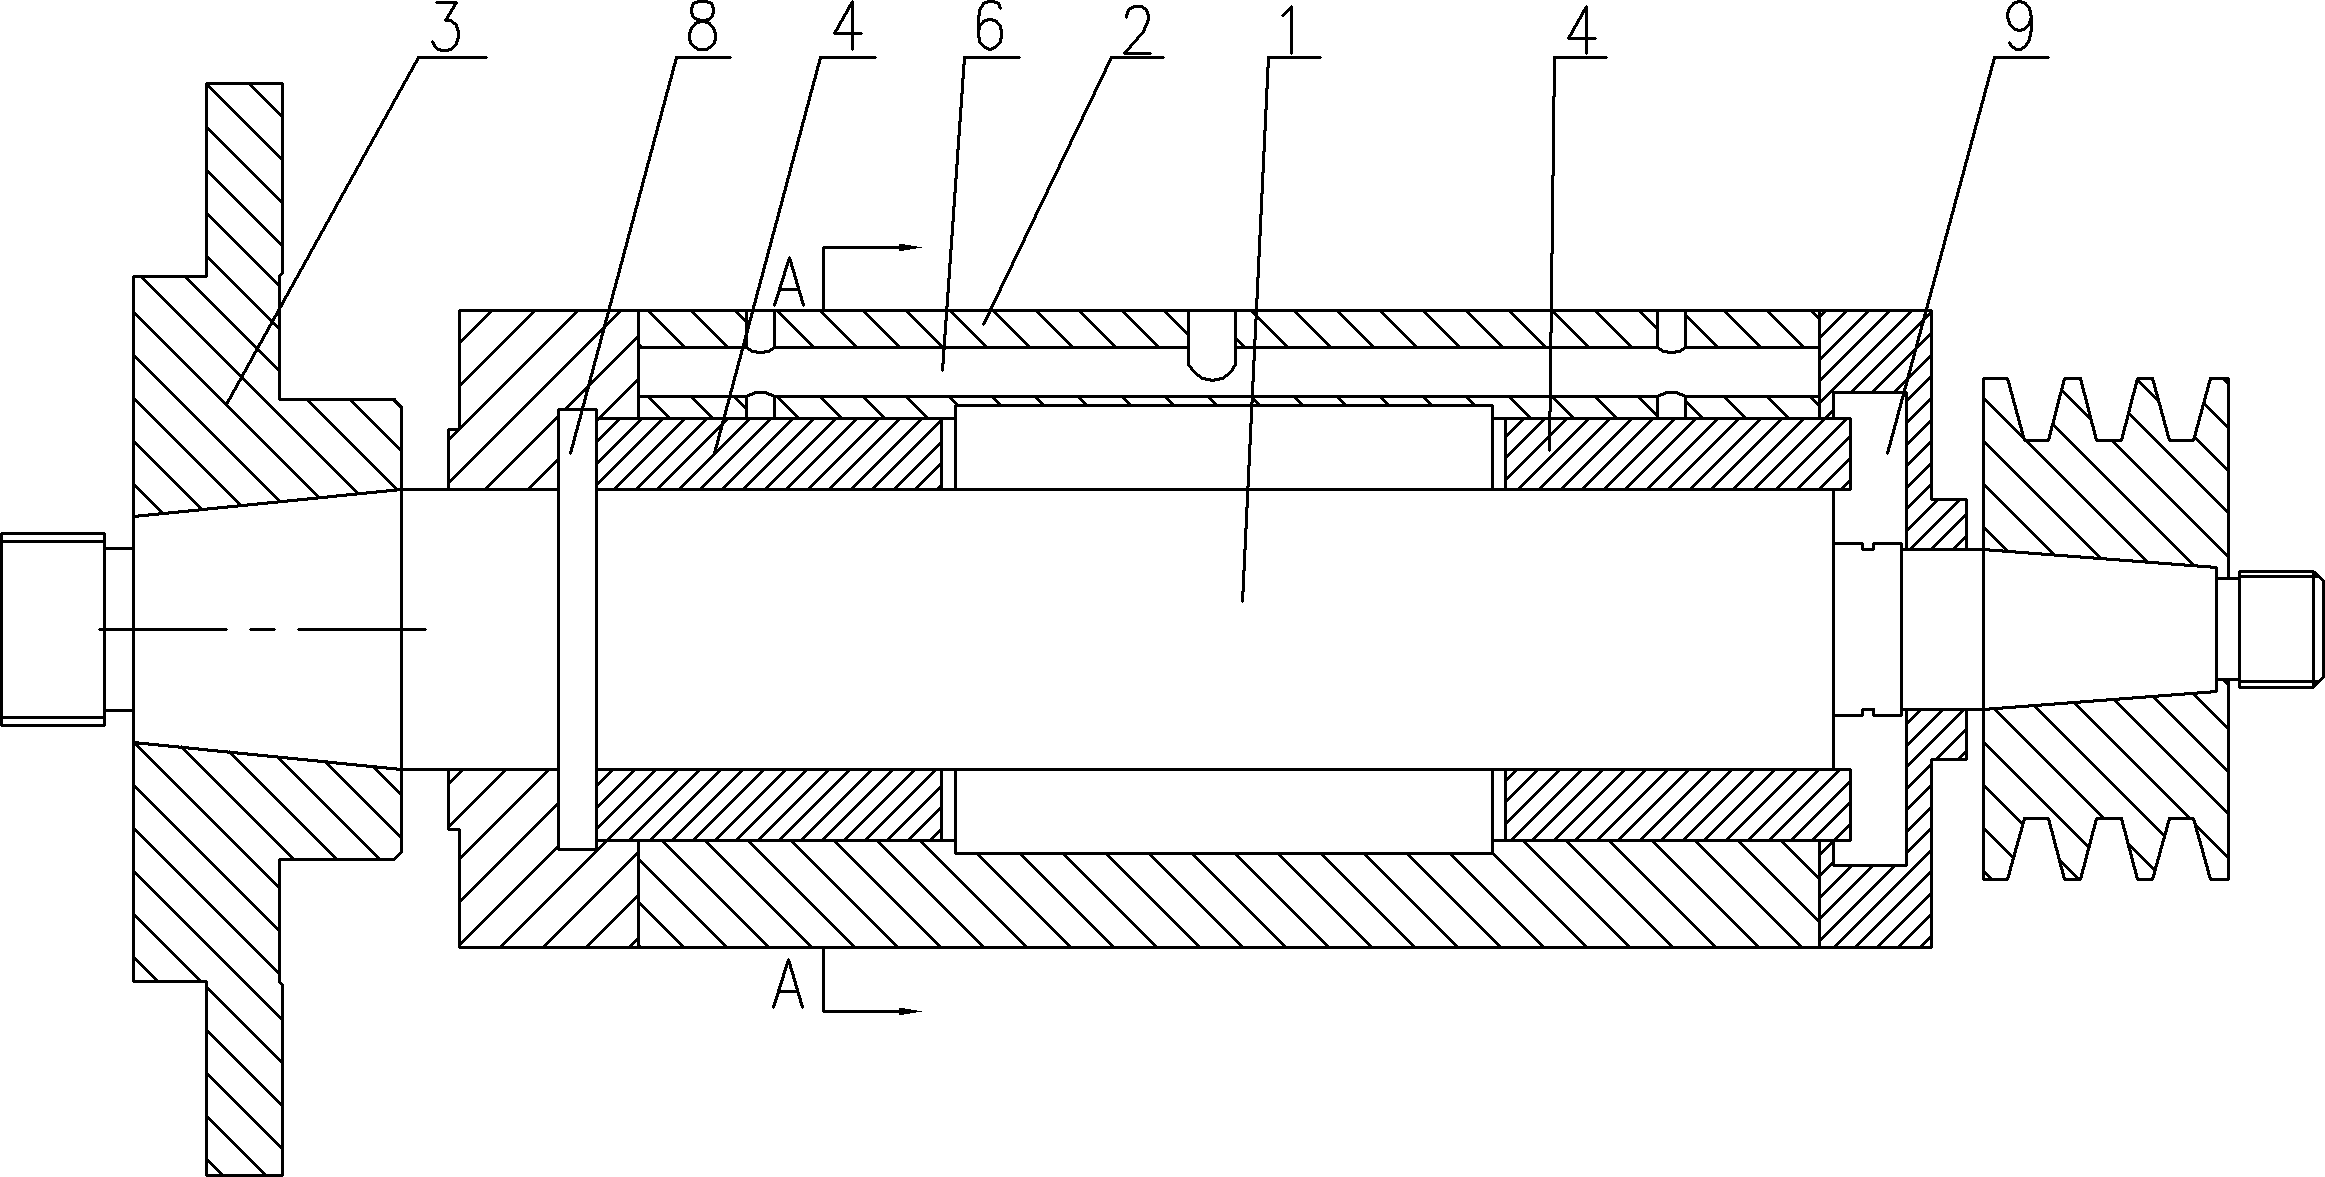 Main shaft supporting structure of centerless grinder for grinding valve lock groove